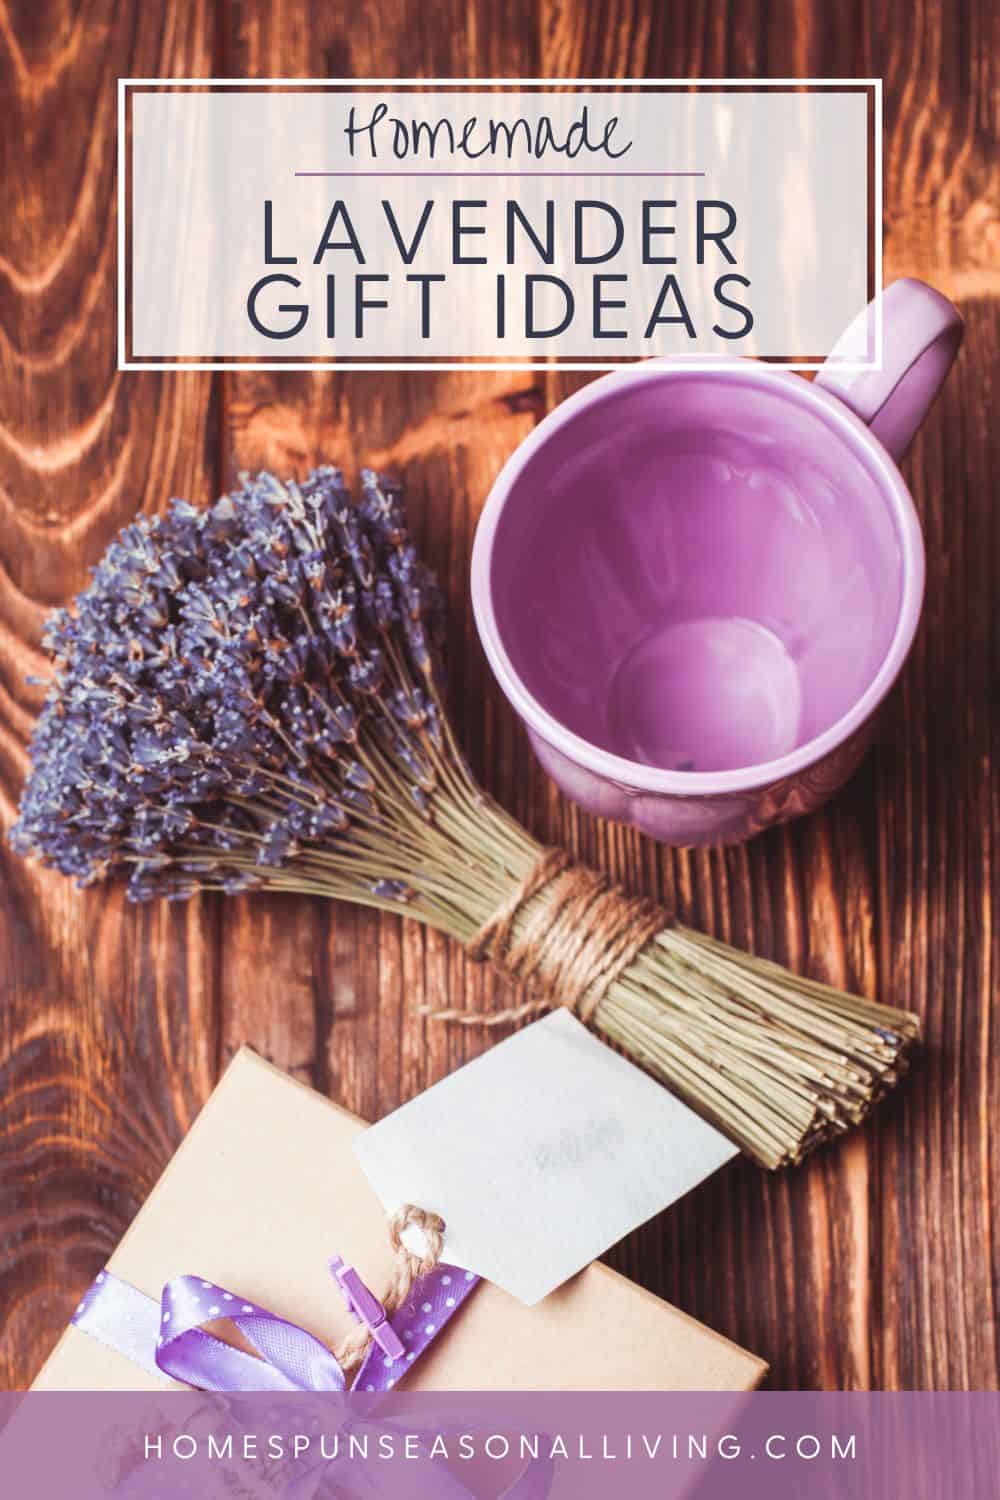 Holiday Gift Guide: DIY Recipe Book - Living The Gourmet